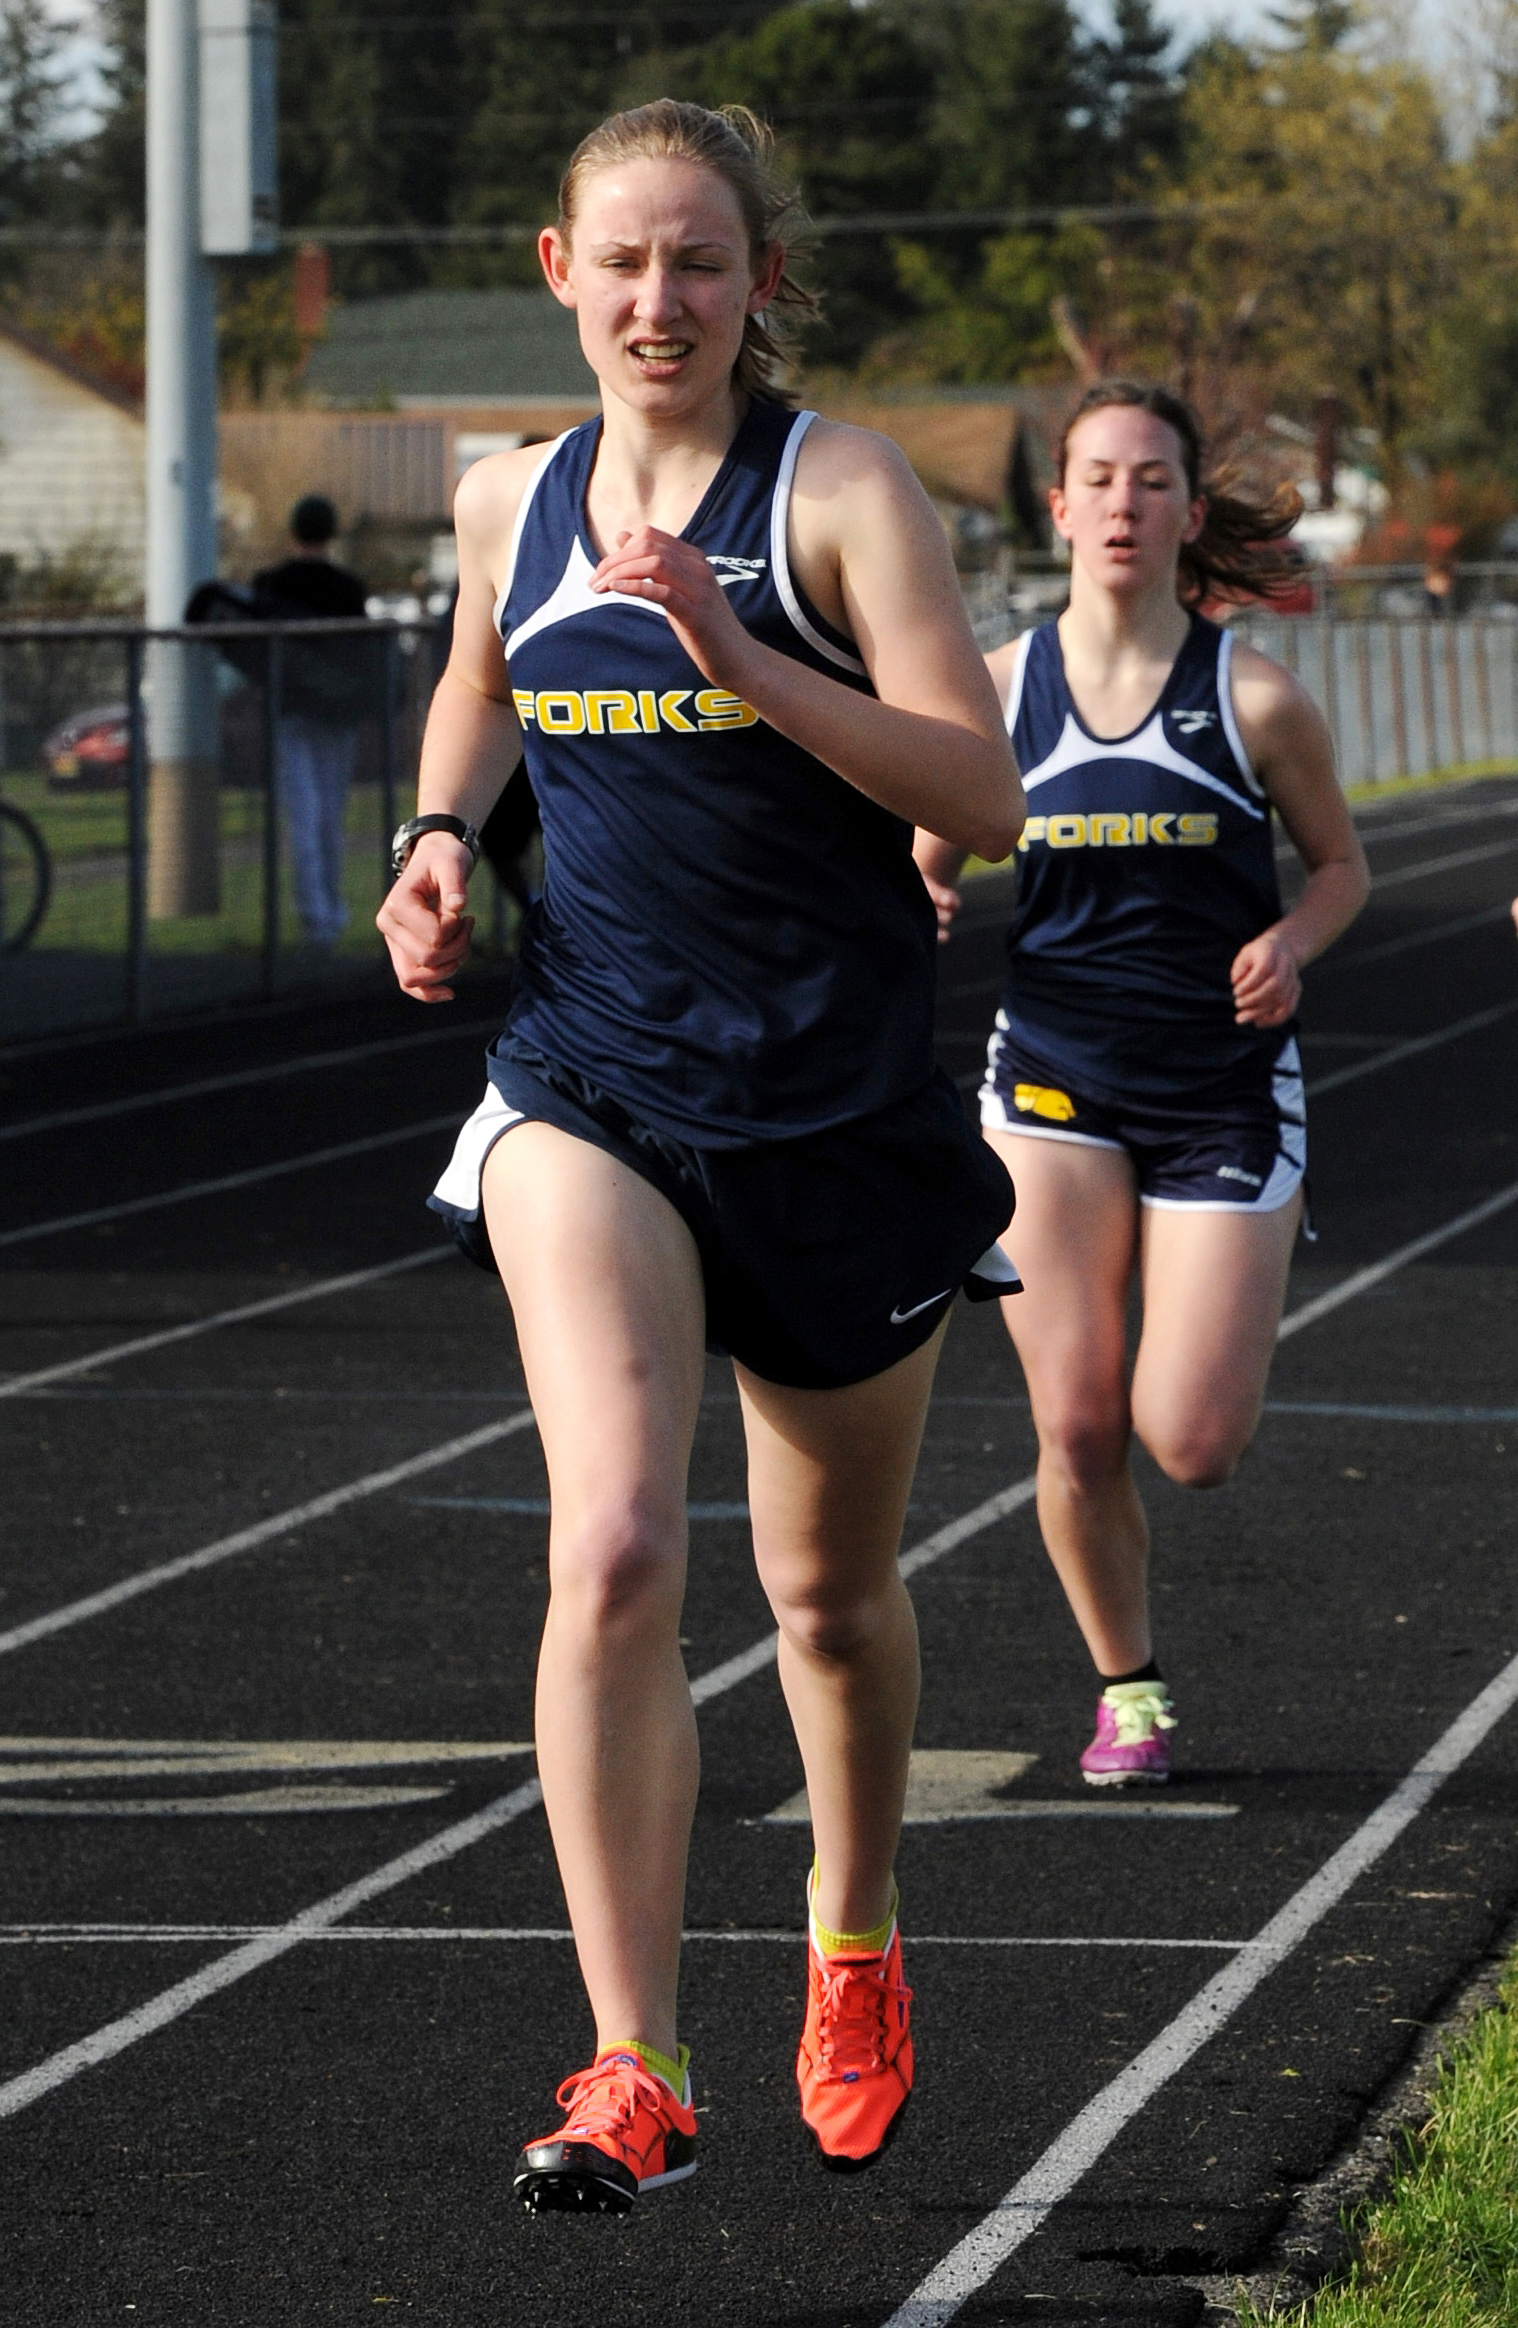 Forks senior Kari Larson will compete in her final state track and field championship this weekend. She'll also sing the national anthem before Saturday's opening ceremonies. (Lonnie Archibald/for Peninsula Daily News)